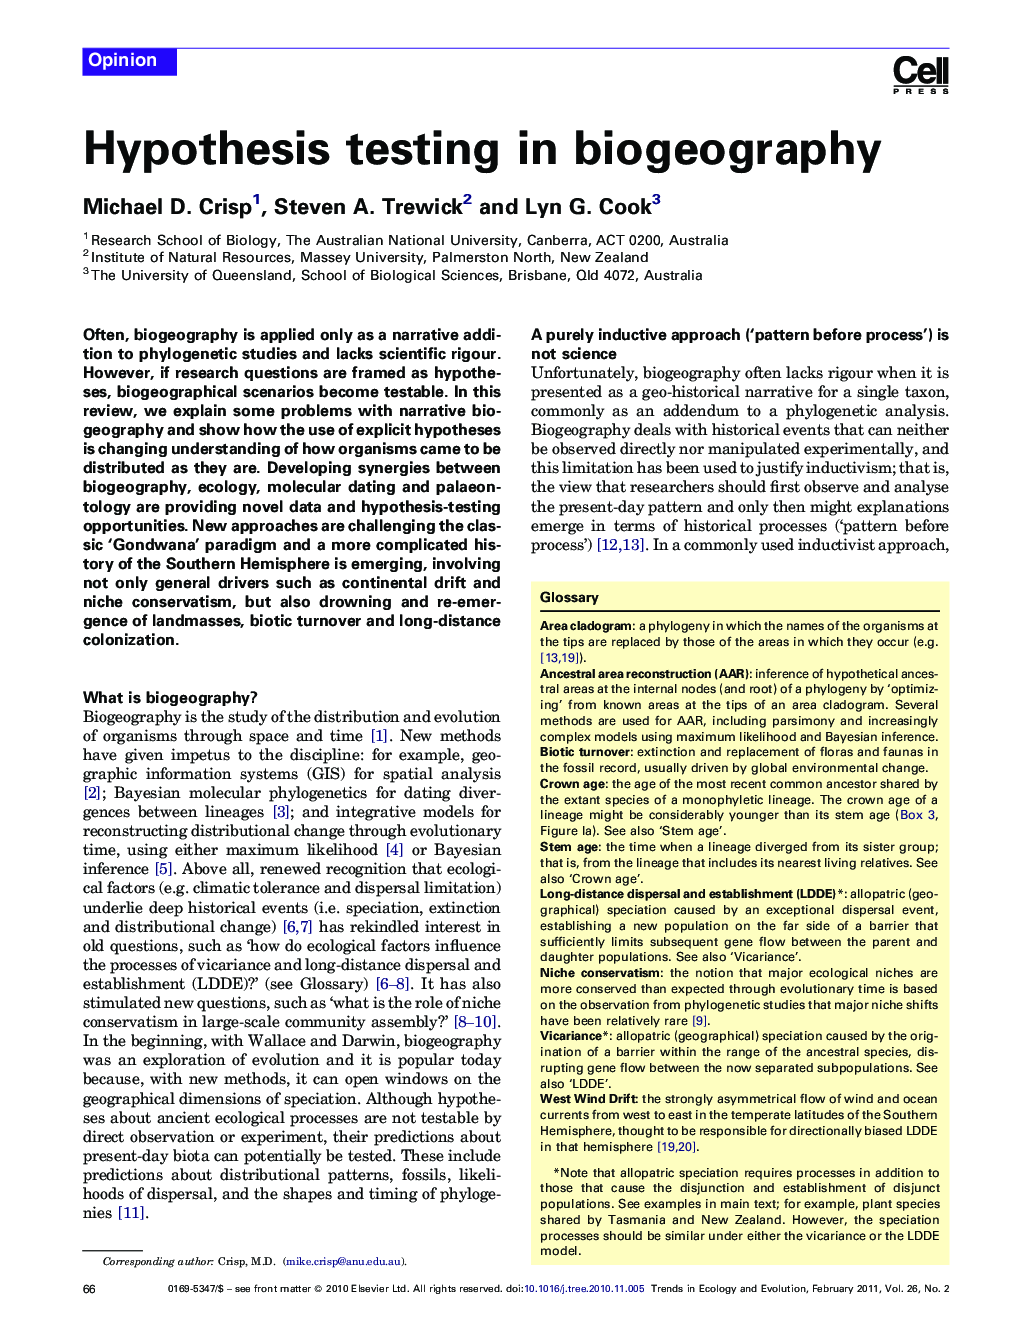 Hypothesis testing in biogeography